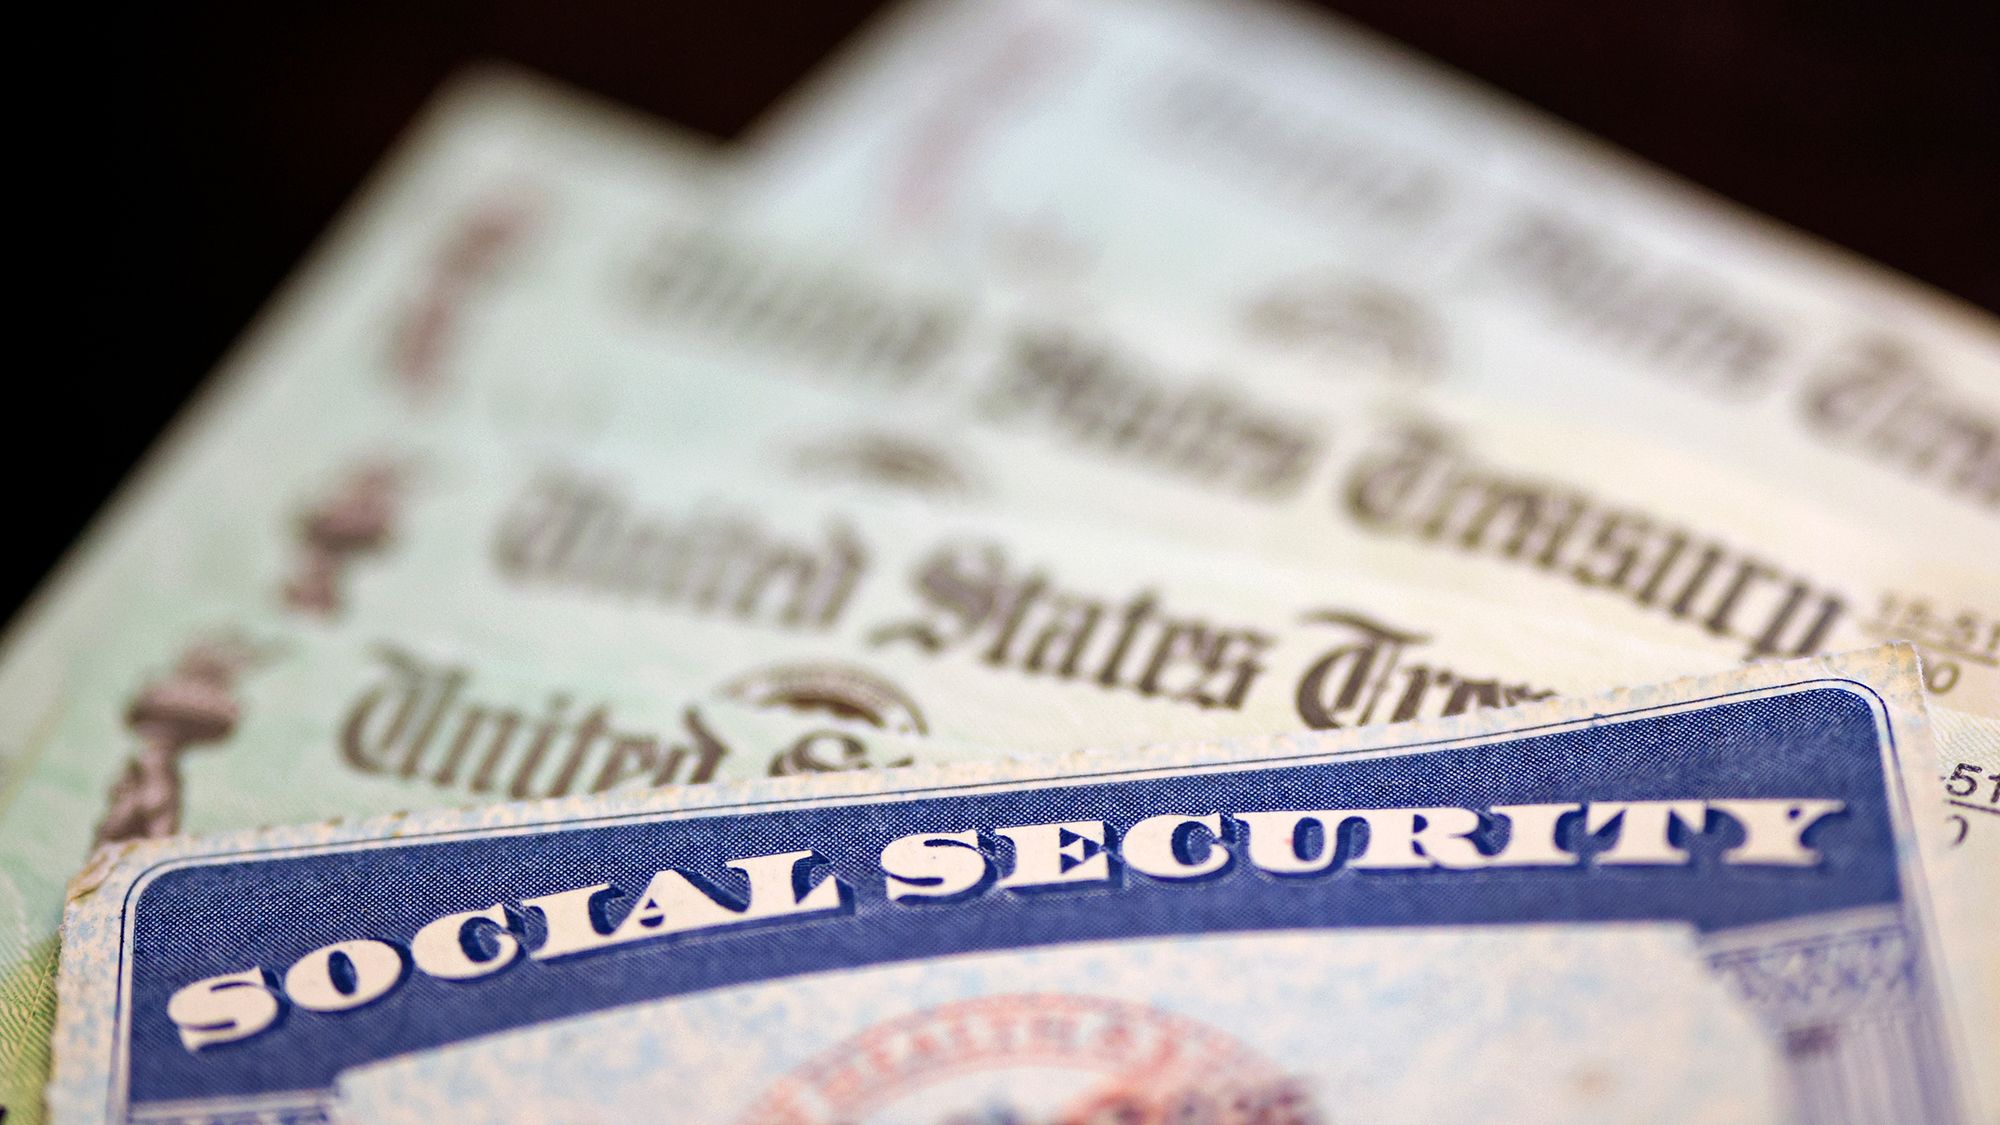 Social Security will not be able to pay full benefits in 2035 if Congress doesn’t act. Medicare has a little more time